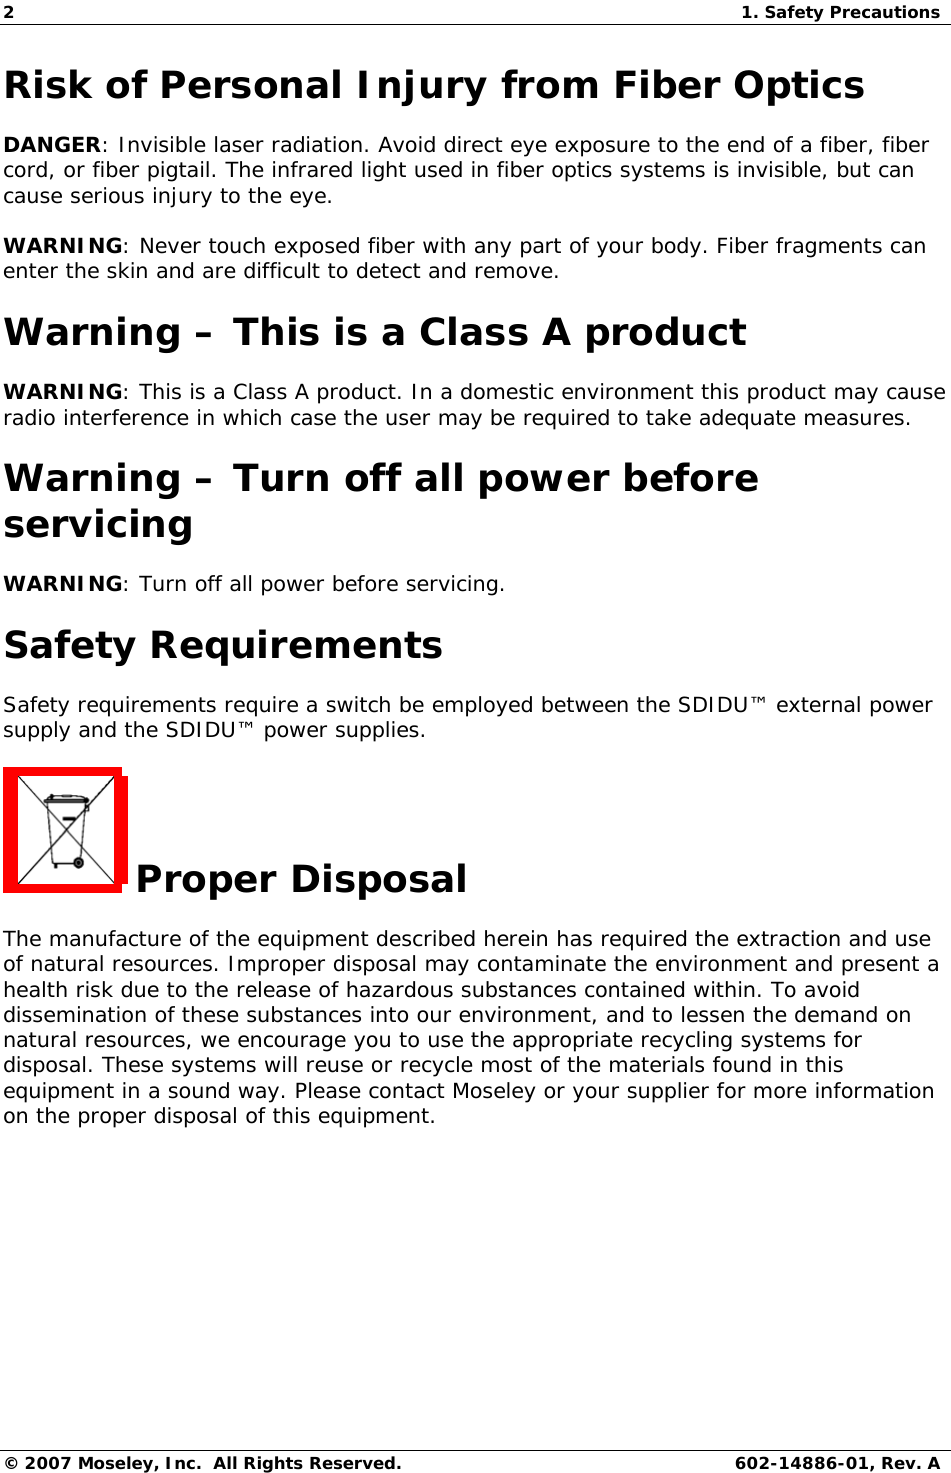 2  1. Safety Precautions © 2007 Moseley, Inc.  All Rights Reserved.  602-14886-01, Rev. A Risk of Personal Injury from Fiber Optics DANGER: Invisible laser radiation. Avoid direct eye exposure to the end of a fiber, fiber cord, or fiber pigtail. The infrared light used in fiber optics systems is invisible, but can cause serious injury to the eye. WARNING: Never touch exposed fiber with any part of your body. Fiber fragments can enter the skin and are difficult to detect and remove. Warning – This is a Class A product WARNING: This is a Class A product. In a domestic environment this product may cause radio interference in which case the user may be required to take adequate measures. Warning – Turn off all power before servicing WARNING: Turn off all power before servicing. Safety Requirements Safety requirements require a switch be employed between the SDIDU™ external power supply and the SDIDU™ power supplies.  Proper Disposal  The manufacture of the equipment described herein has required the extraction and use of natural resources. Improper disposal may contaminate the environment and present a health risk due to the release of hazardous substances contained within. To avoid dissemination of these substances into our environment, and to lessen the demand on natural resources, we encourage you to use the appropriate recycling systems for disposal. These systems will reuse or recycle most of the materials found in this equipment in a sound way. Please contact Moseley or your supplier for more information on the proper disposal of this equipment.